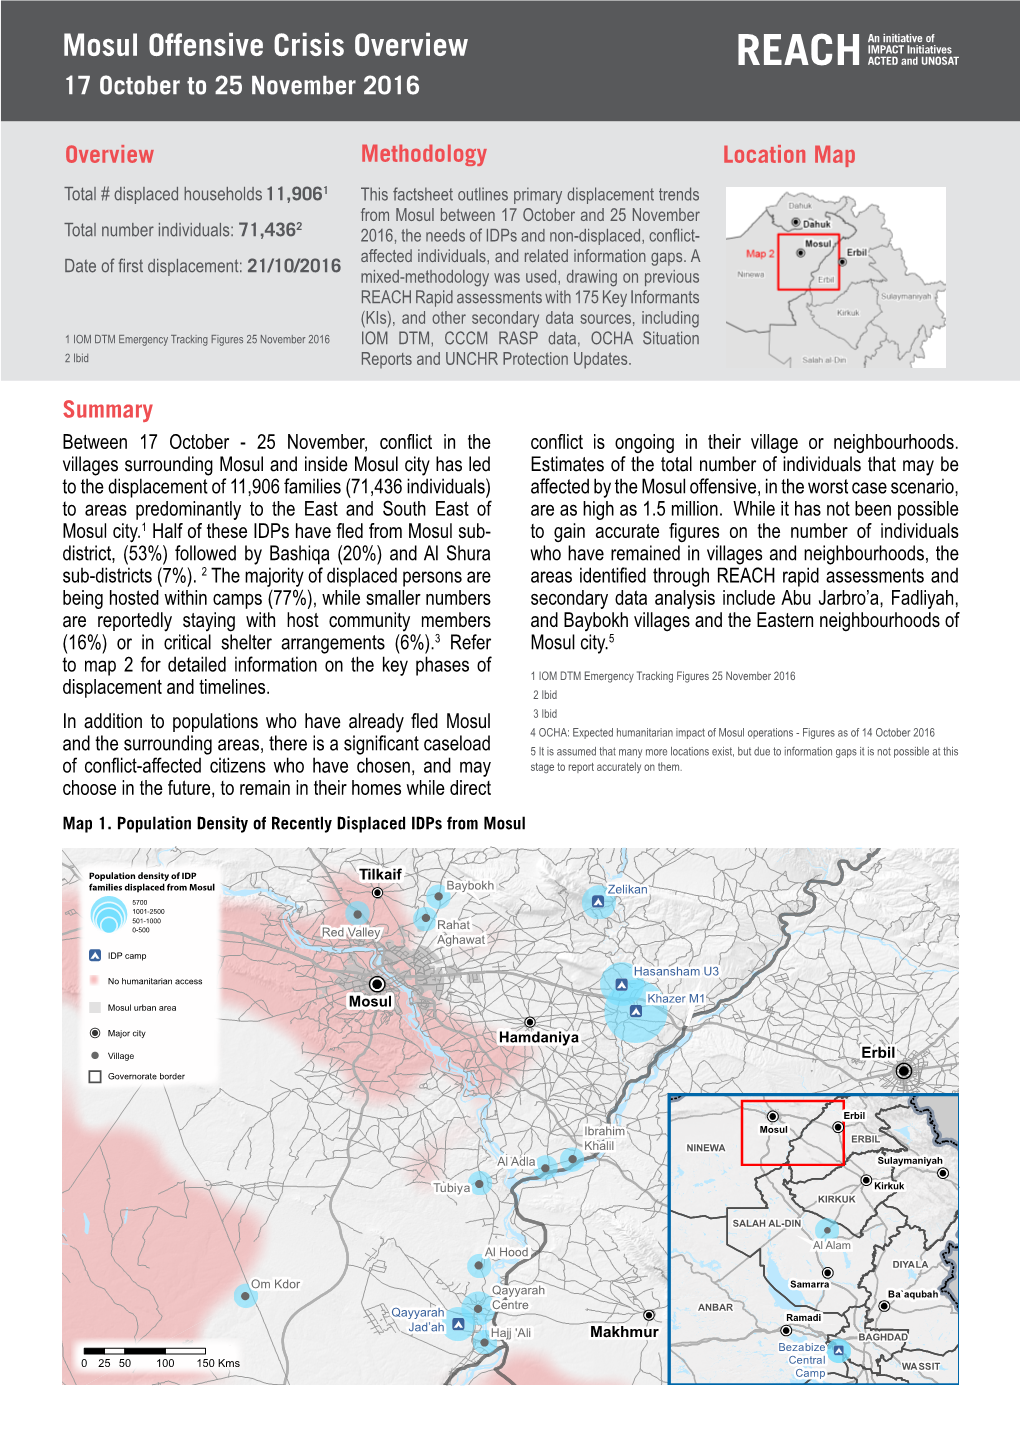 Mosul Offensive Crisis Overview 17 October to 25 November 2016